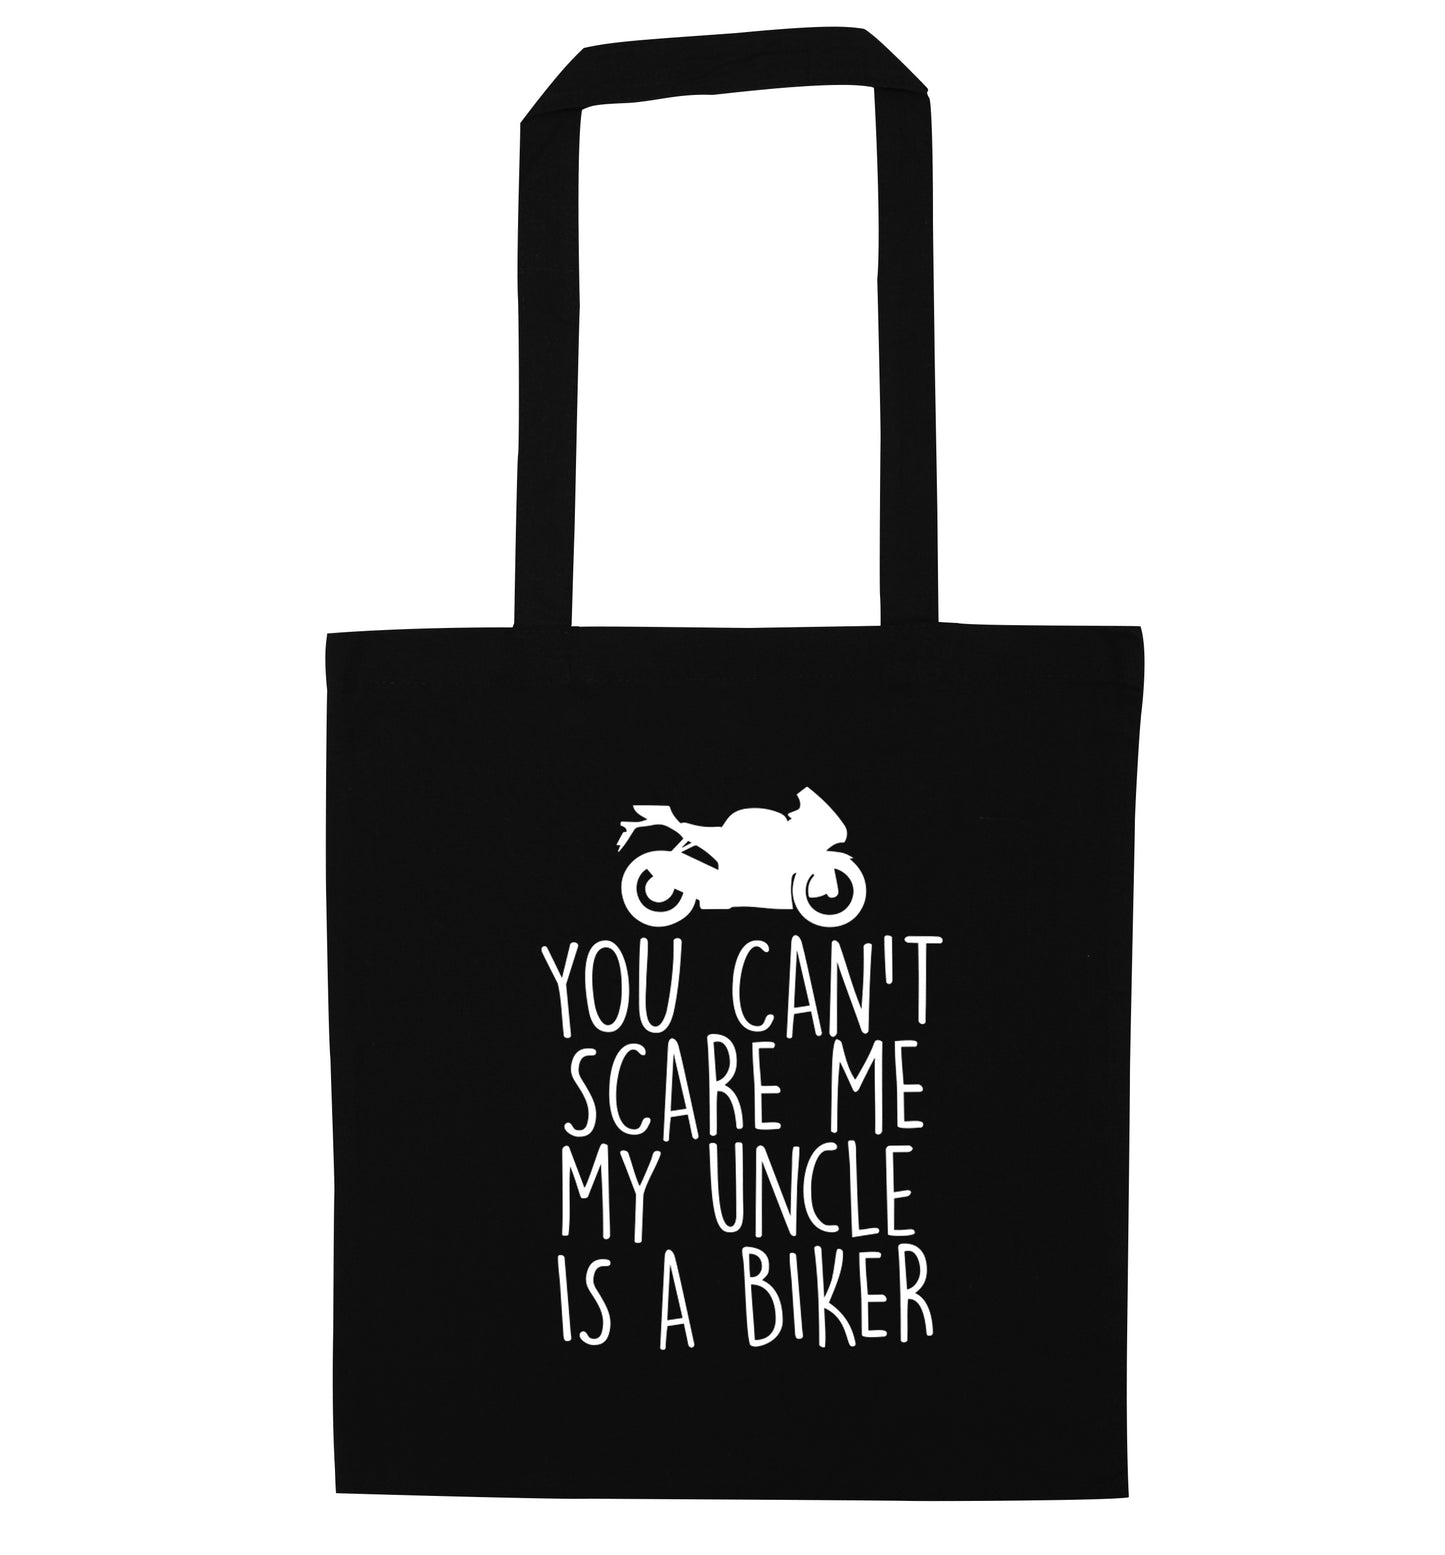 You can't scare me my uncle is a biker black tote bag